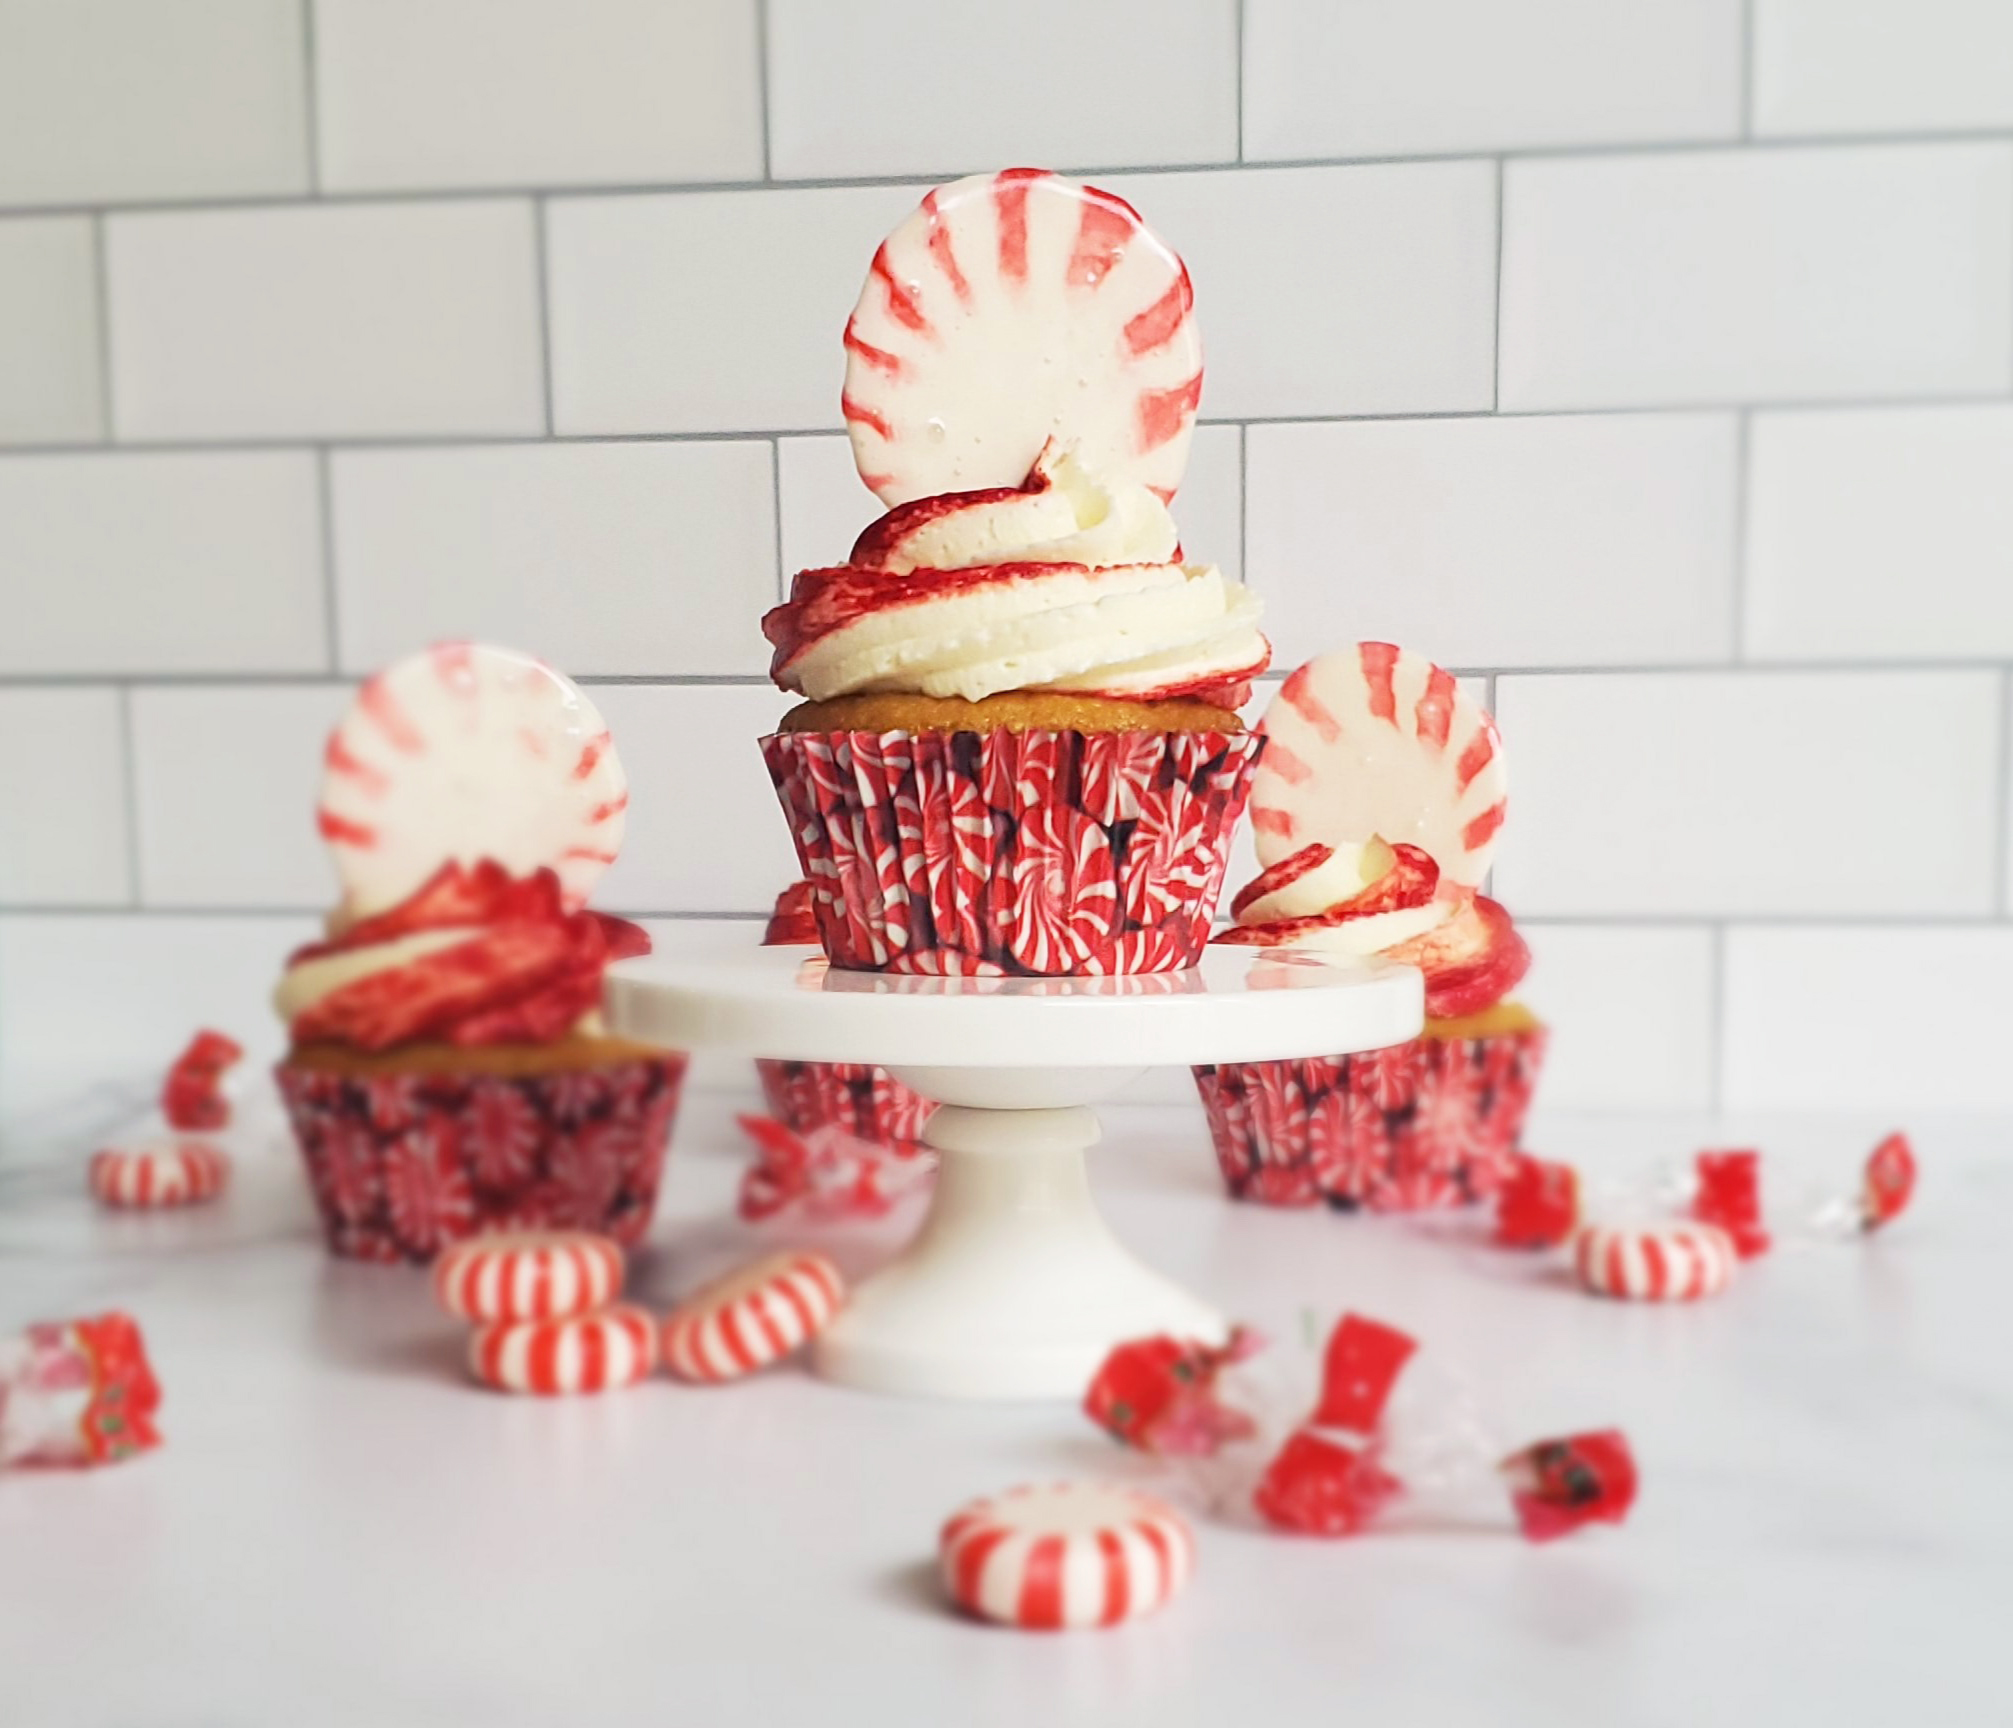 Vanilla Peppermint cupcakes with a melted peppermint candy piece on top. The center cupcake is on a mini pedestal and surrounded by peppermint candies and their wrappers.